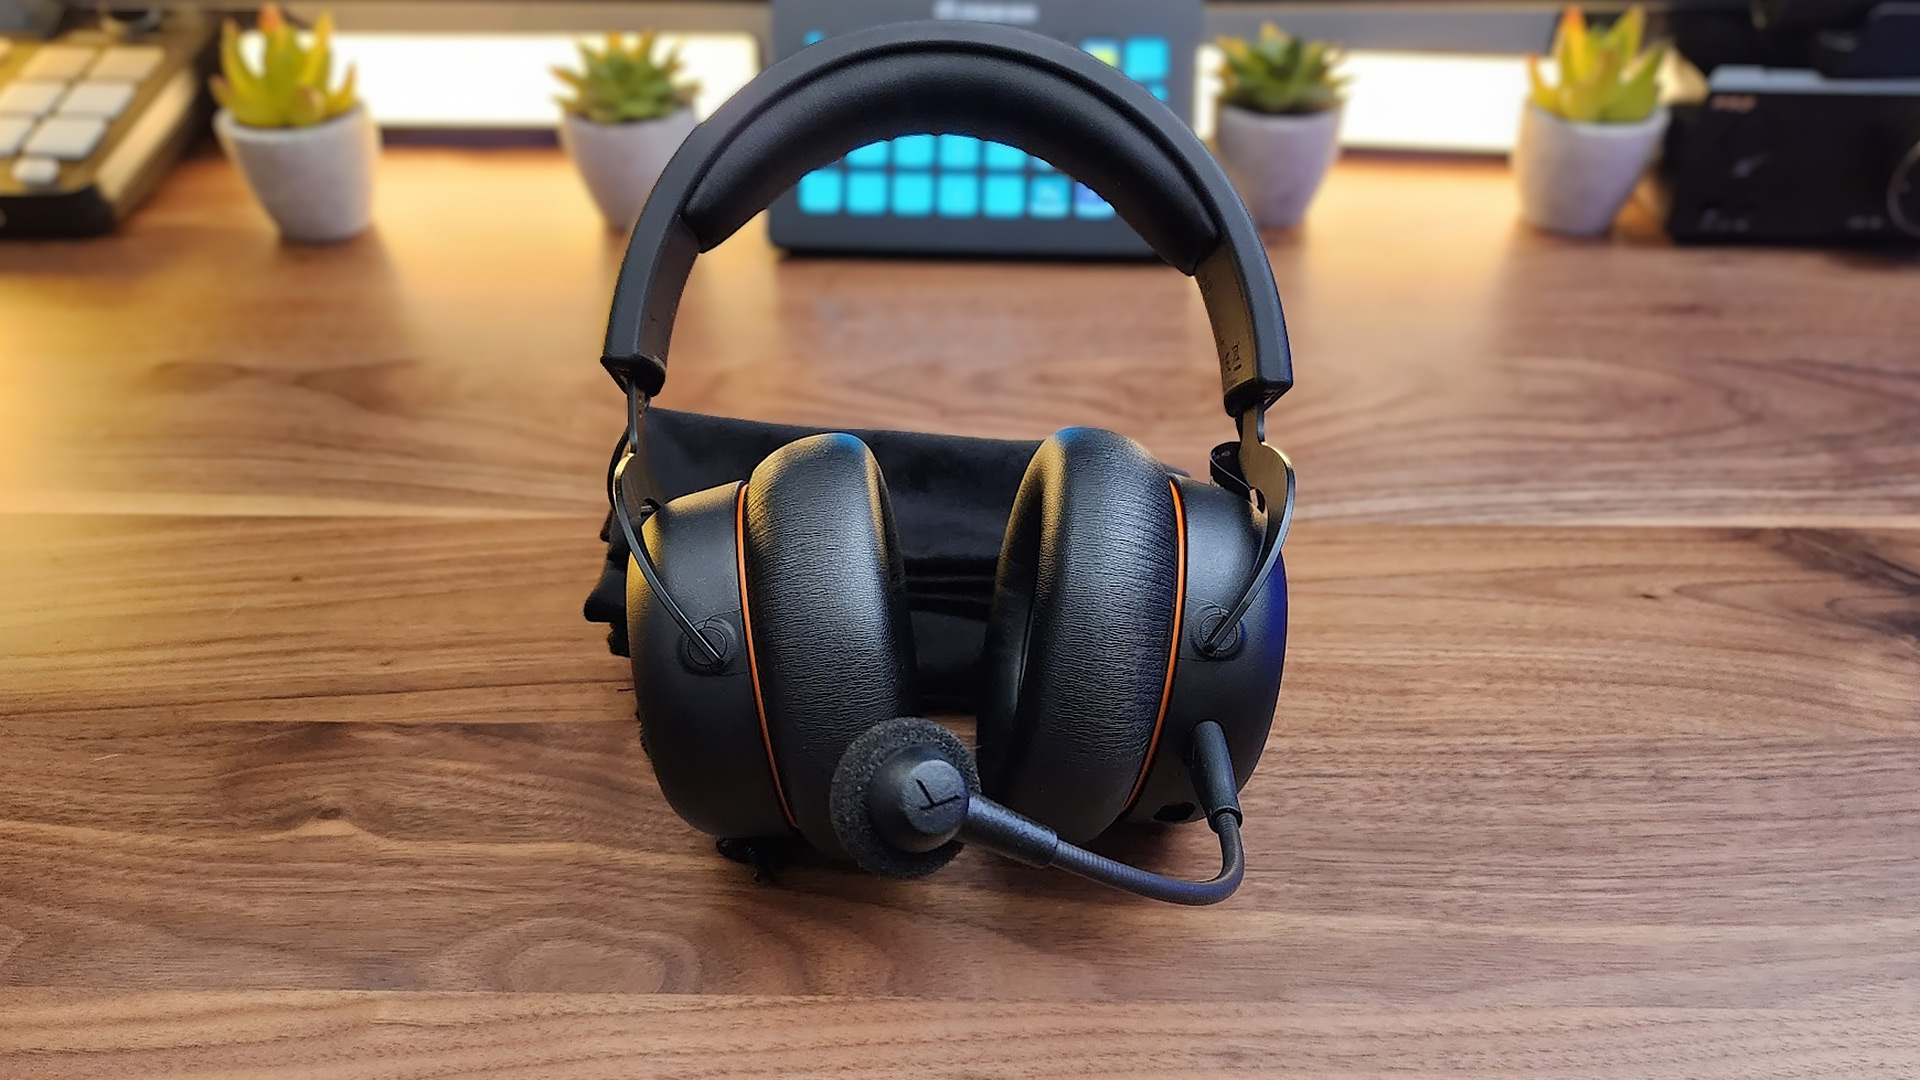 Beyerdynamic MMX 200 Wireless gaming headset review: Leveled-up sound with some trade-offs